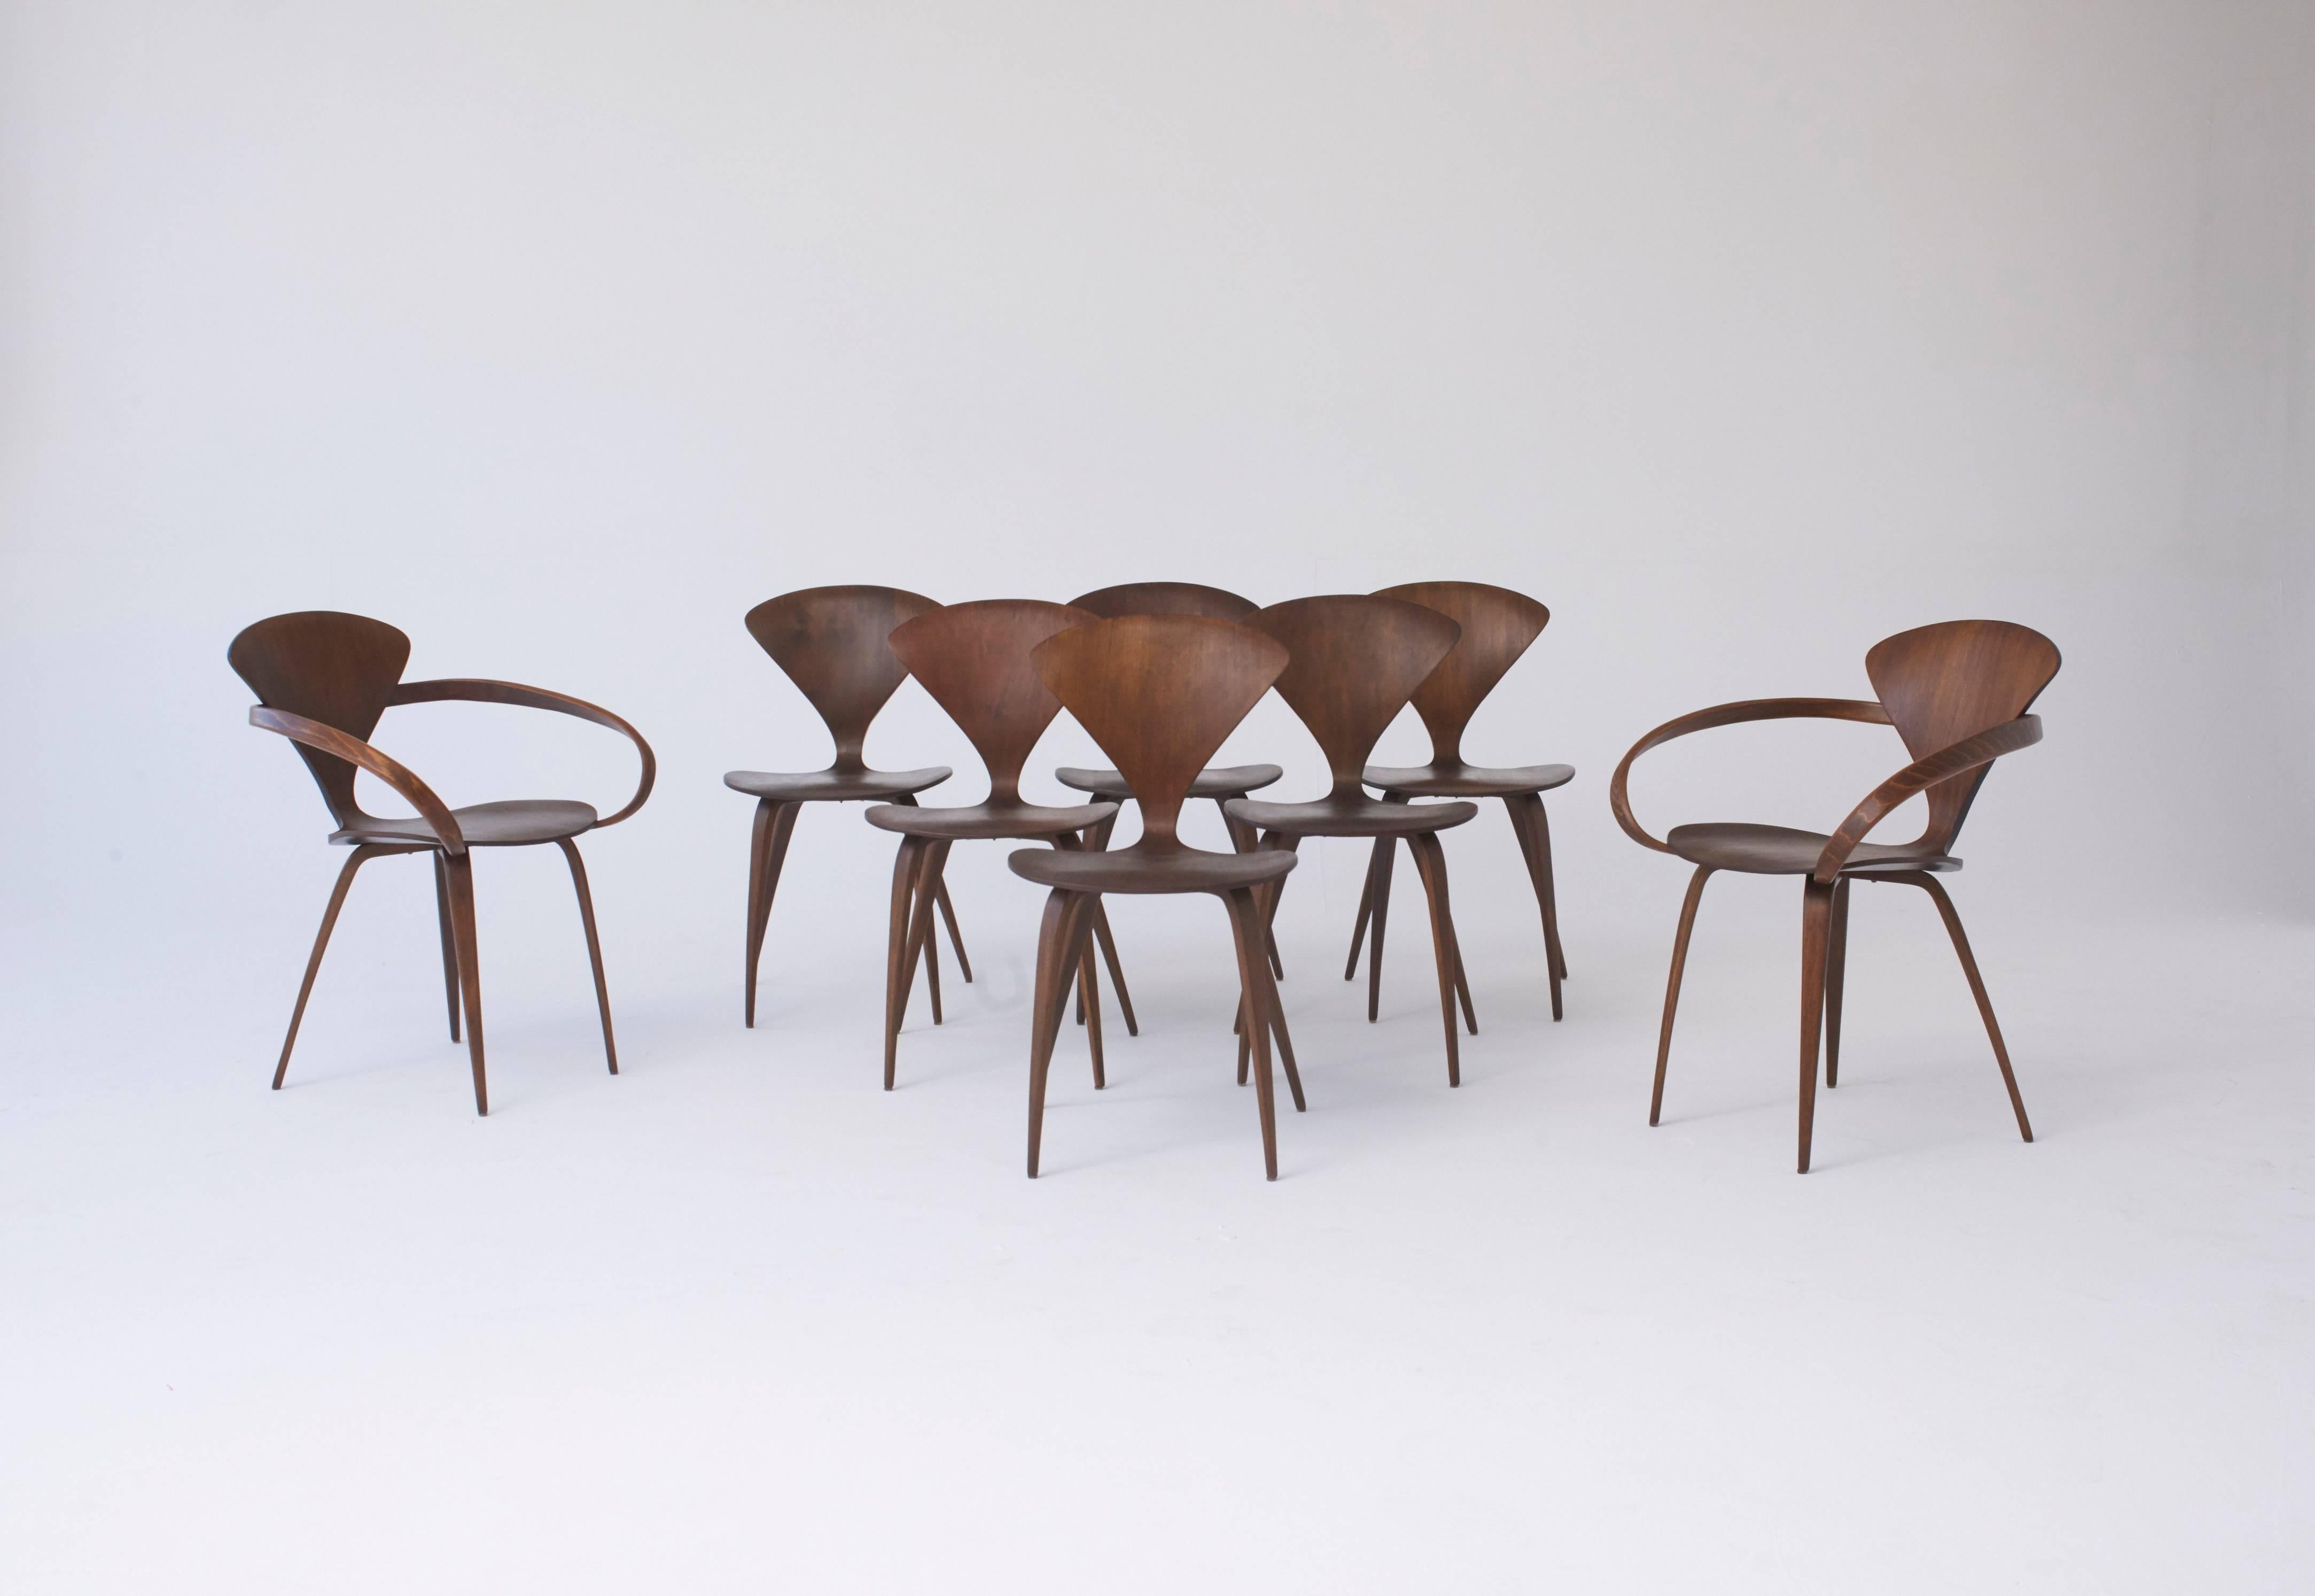 A rare full set of eight original Norman Cherner dining chairs, made by Plycraft USA in the 1960s. Six side chairs and two pretzel end chairs. Bentwood frames. Plycraft labels to the underside of all.